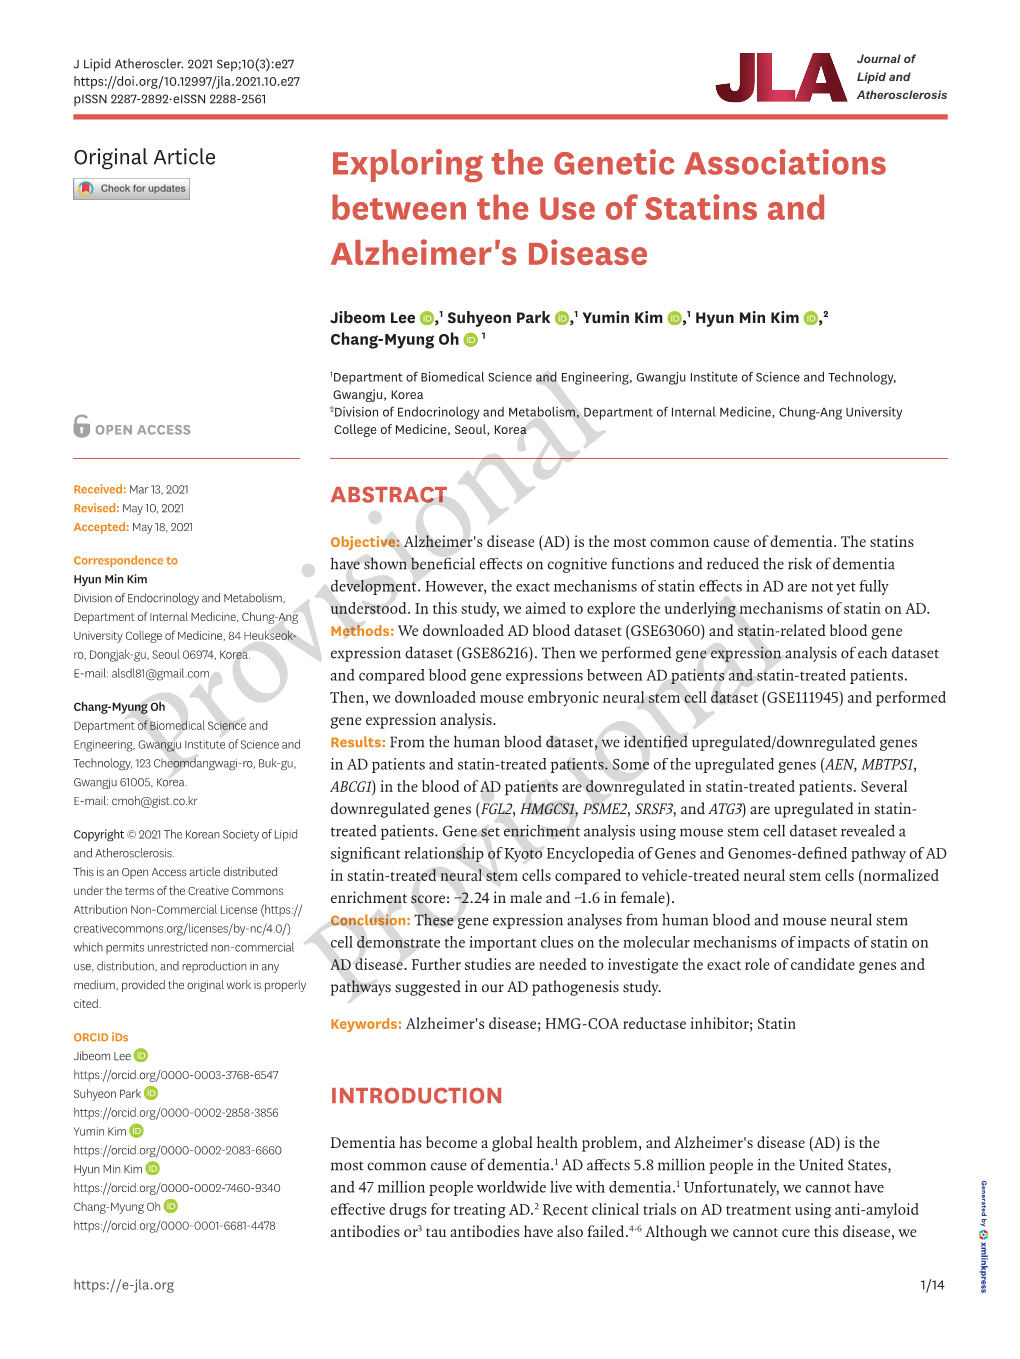 Exploring the Genetic Associations Between the Use of Statins and Alzheimer's Disease